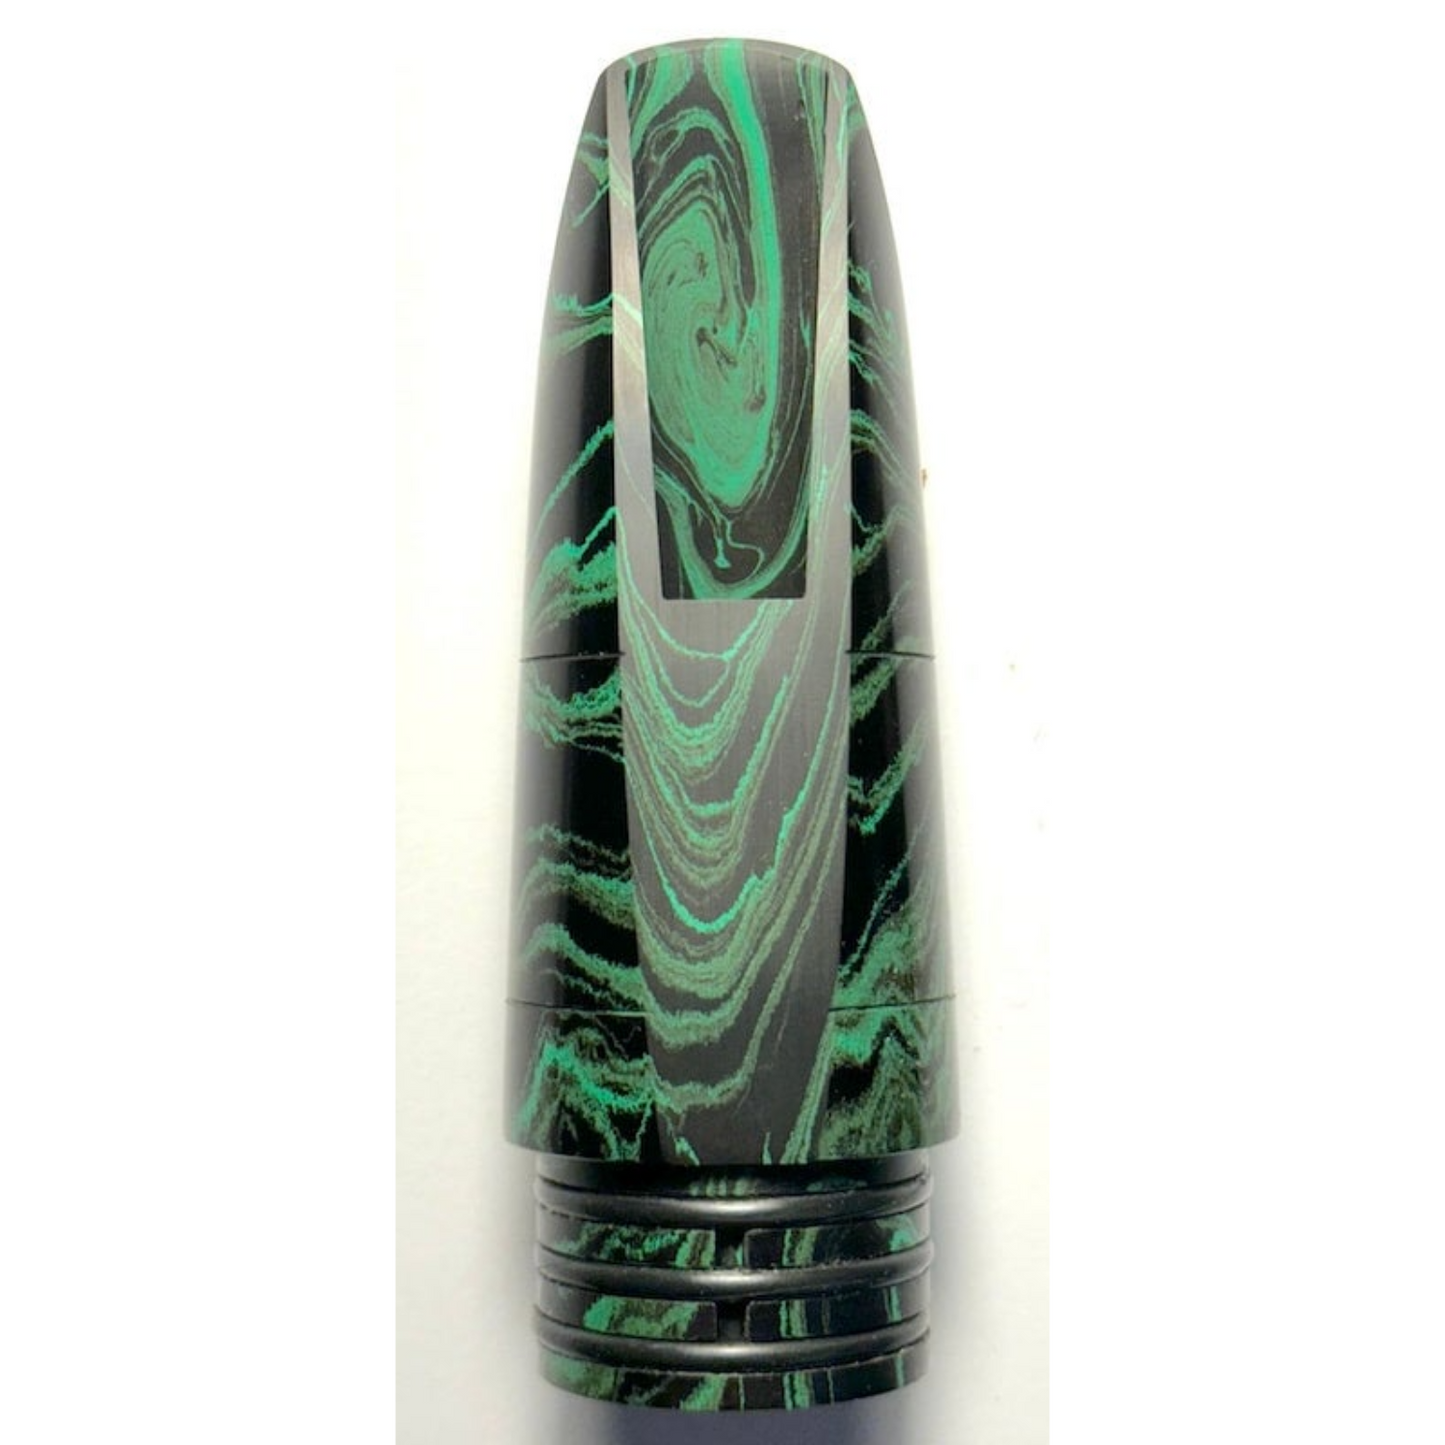 Rear view of Corbin Honu mouthpiece, green and black marbled, showing window and table